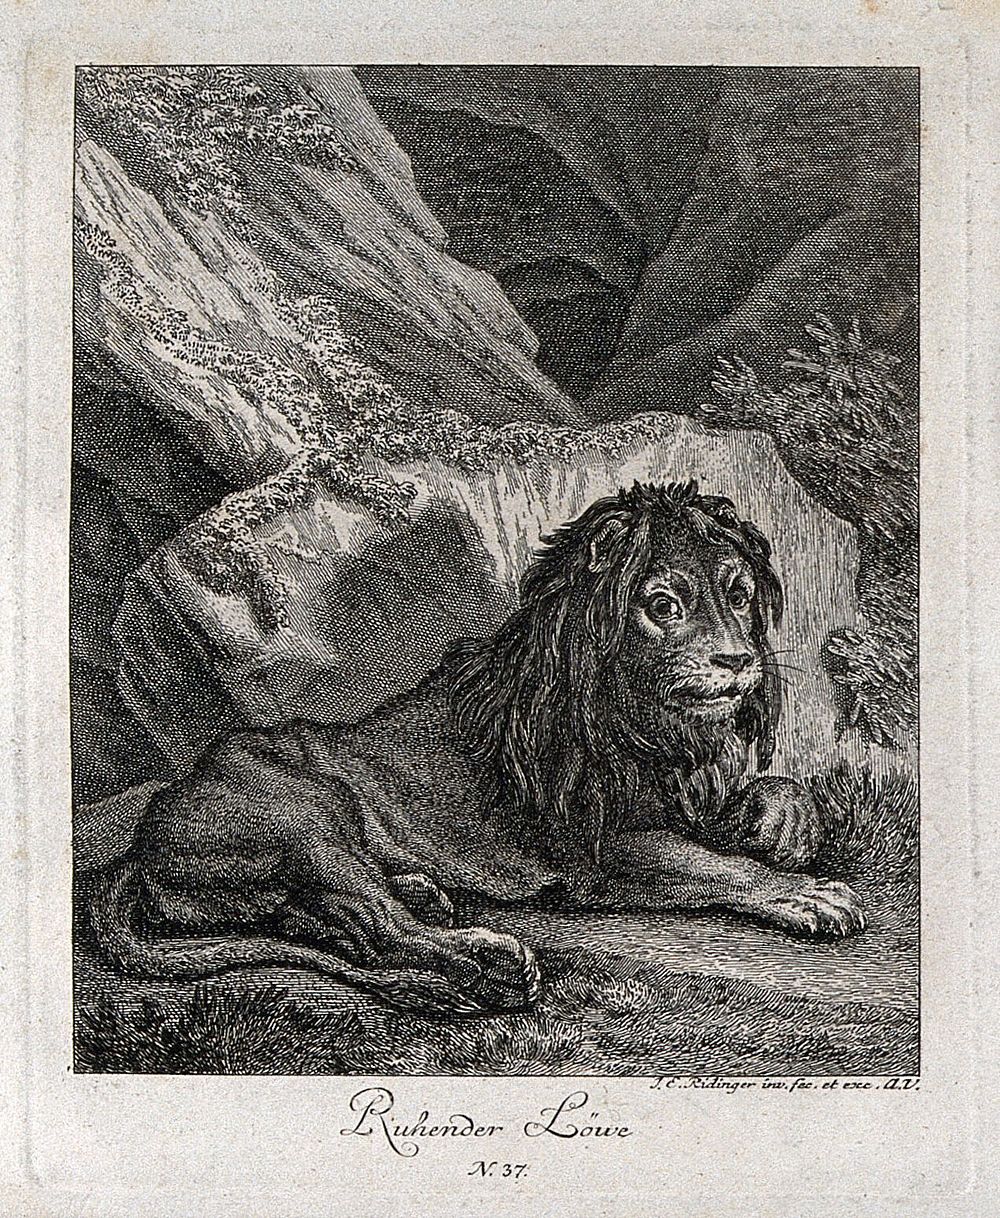 A lion resting and leaning against a rock. Etching by J. E. Ridinger.